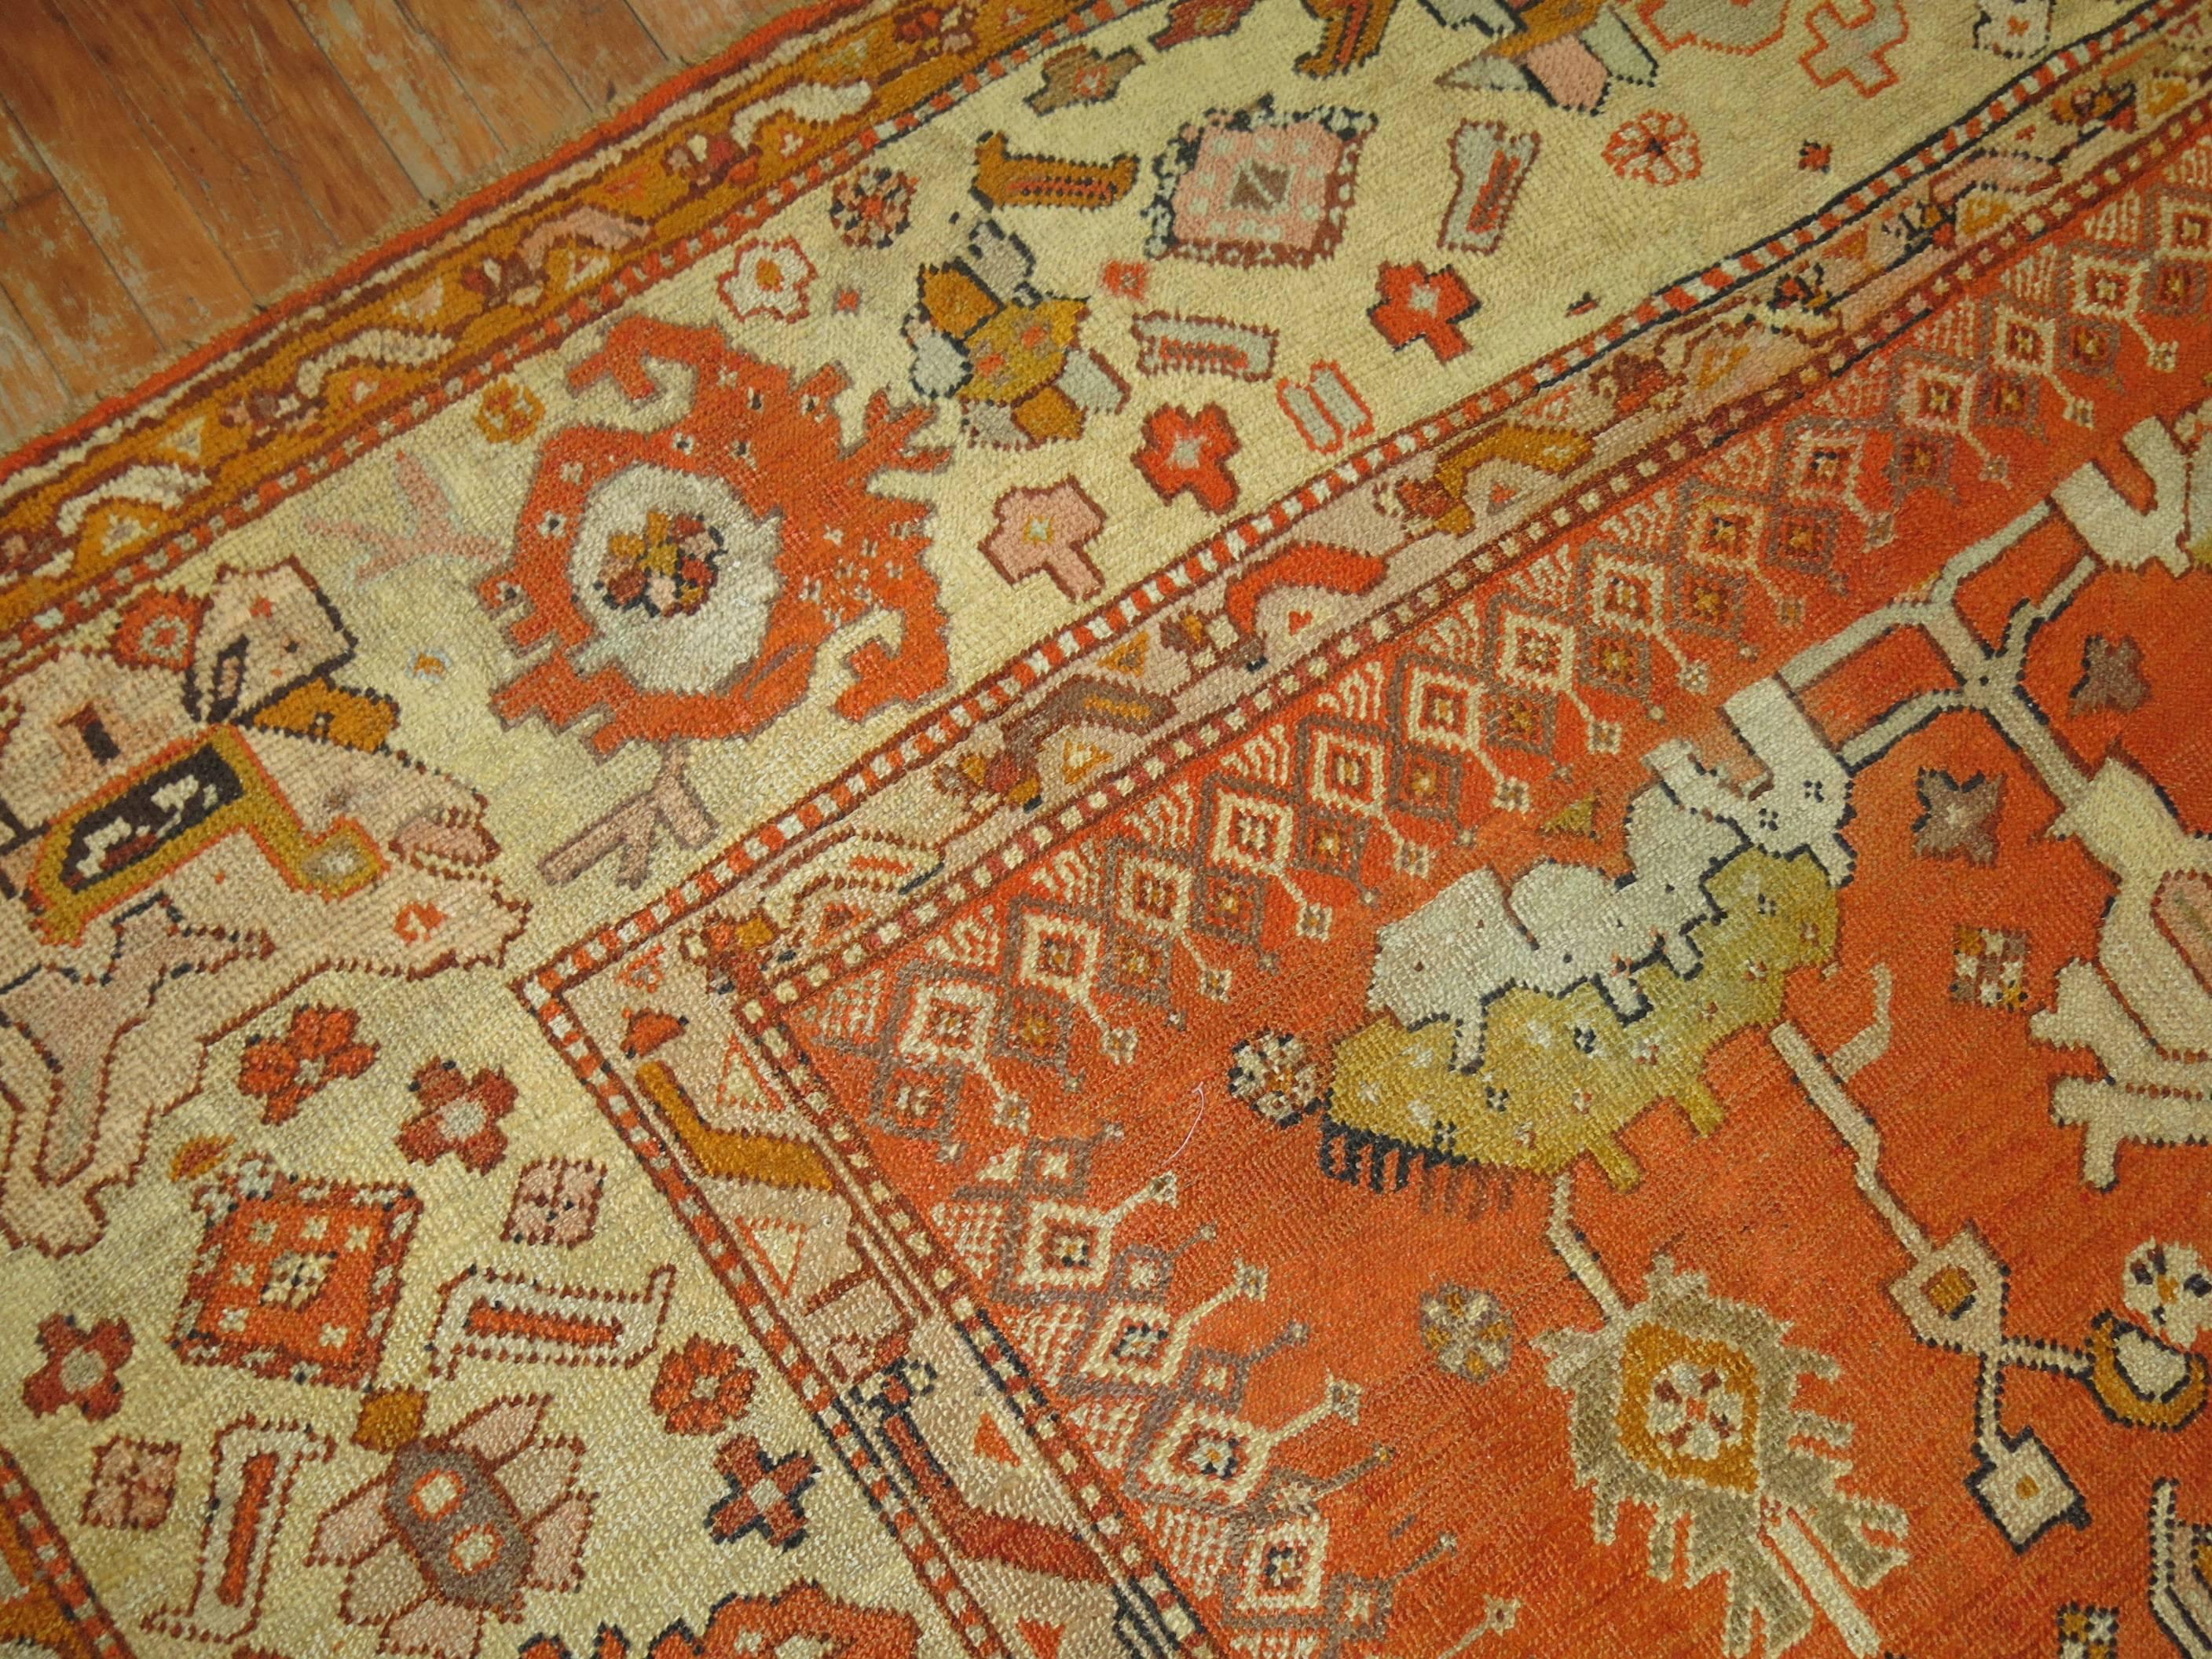 An exhilarating late 19th century antique Turkish Oushak rug in predominant bright orange accents. The finest quality of wool that you can find in any type of rug from this origin.